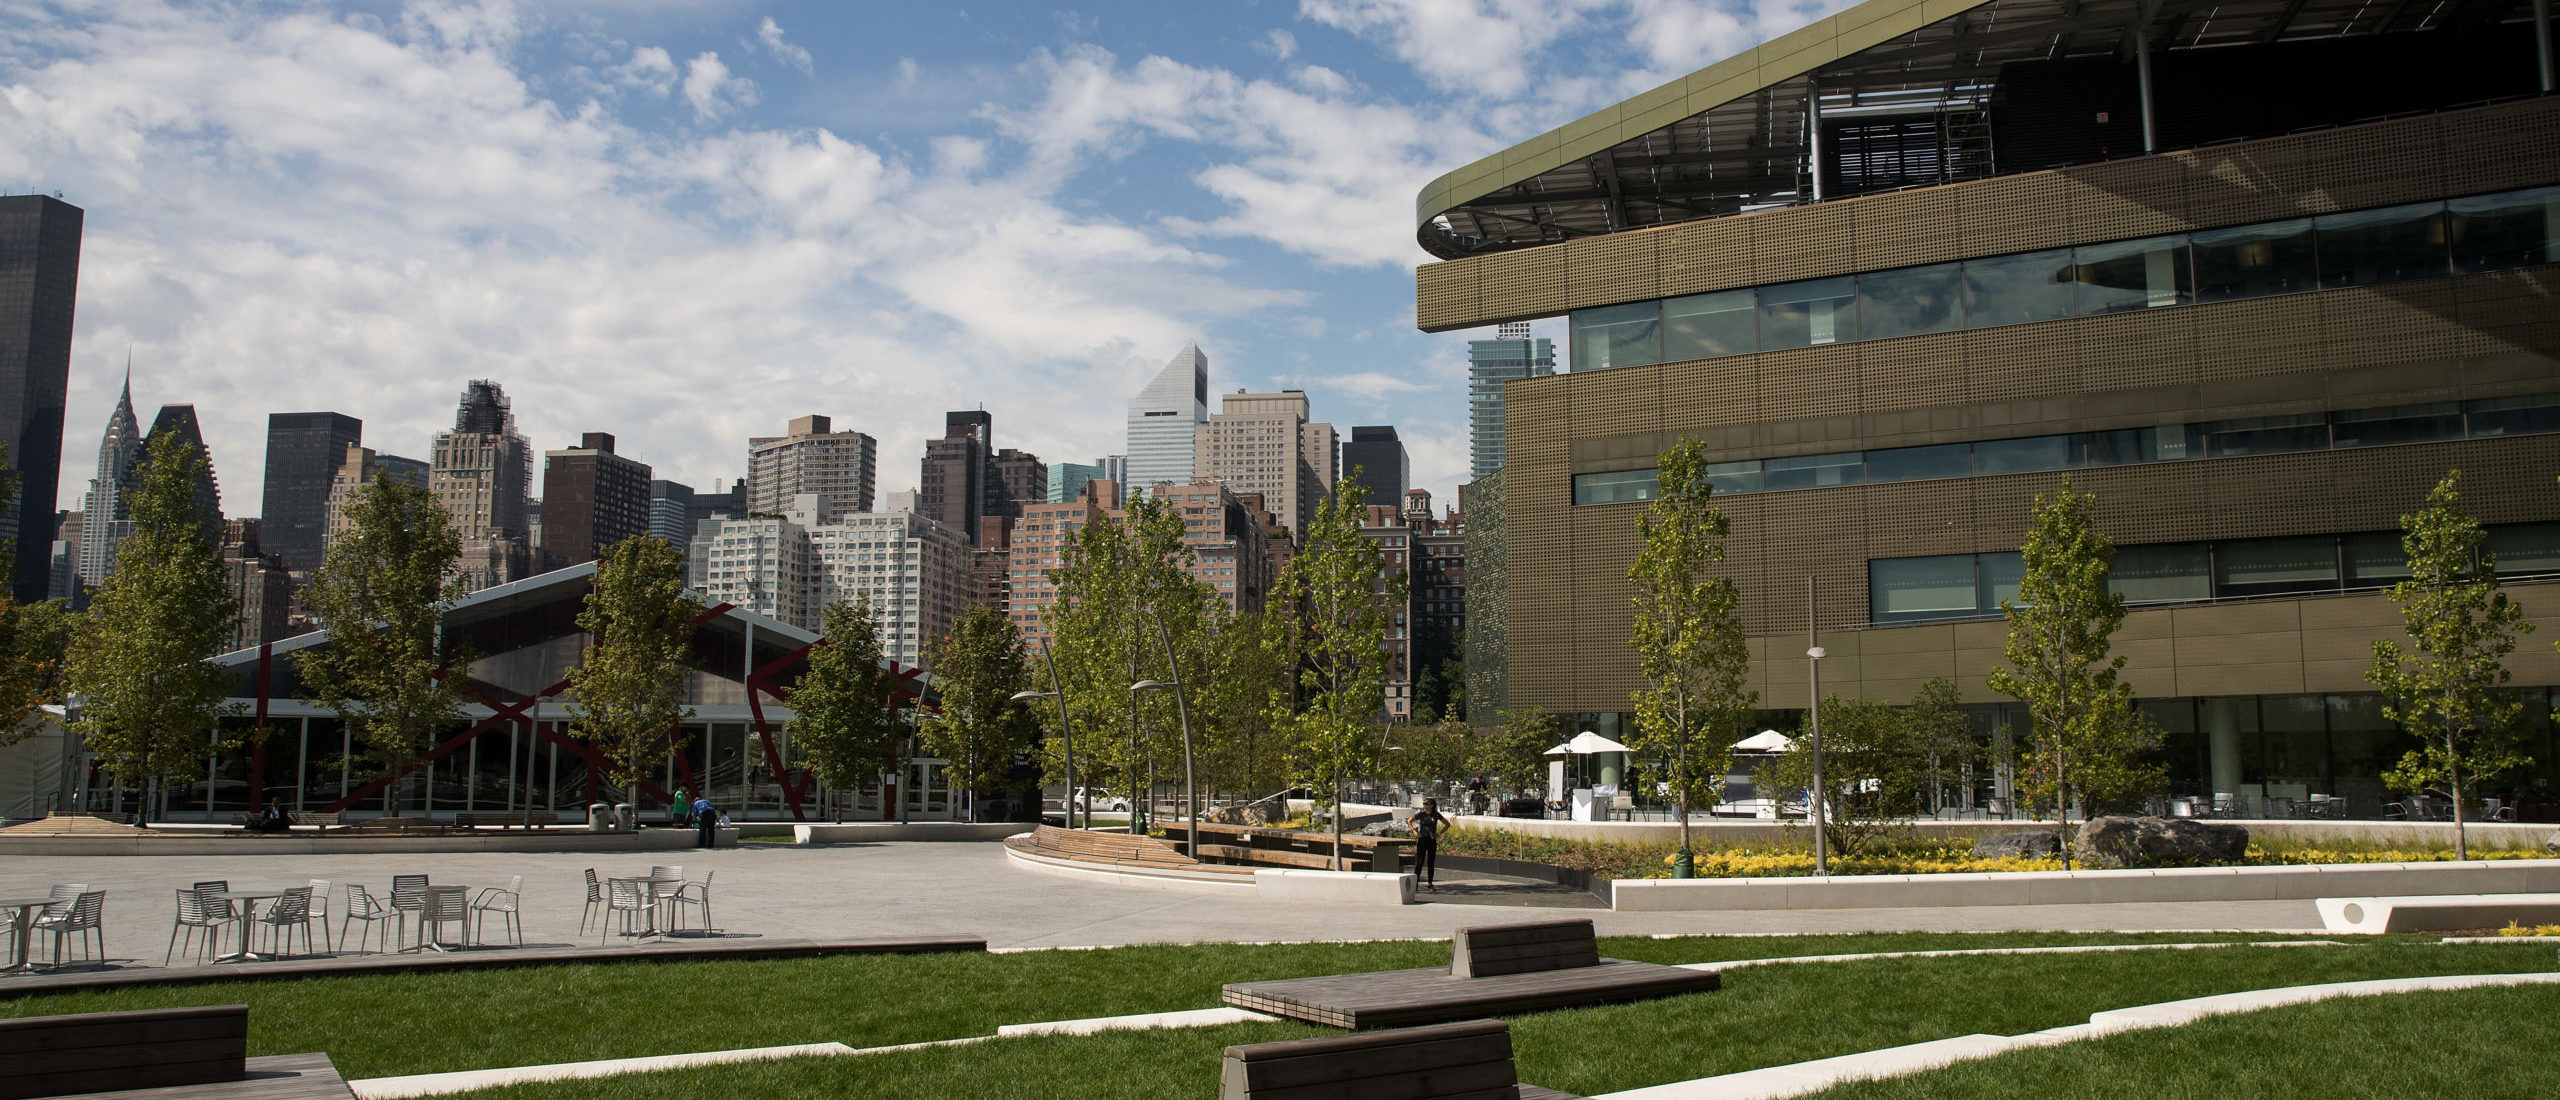 NEW YORK, NY - SEPTEMBER 13: A view of the campus and the main academic building (R), the Bloomberg Center, on the new campus of Cornell Tech on Roosevelt Island, September 13, 2017 in New York City. 